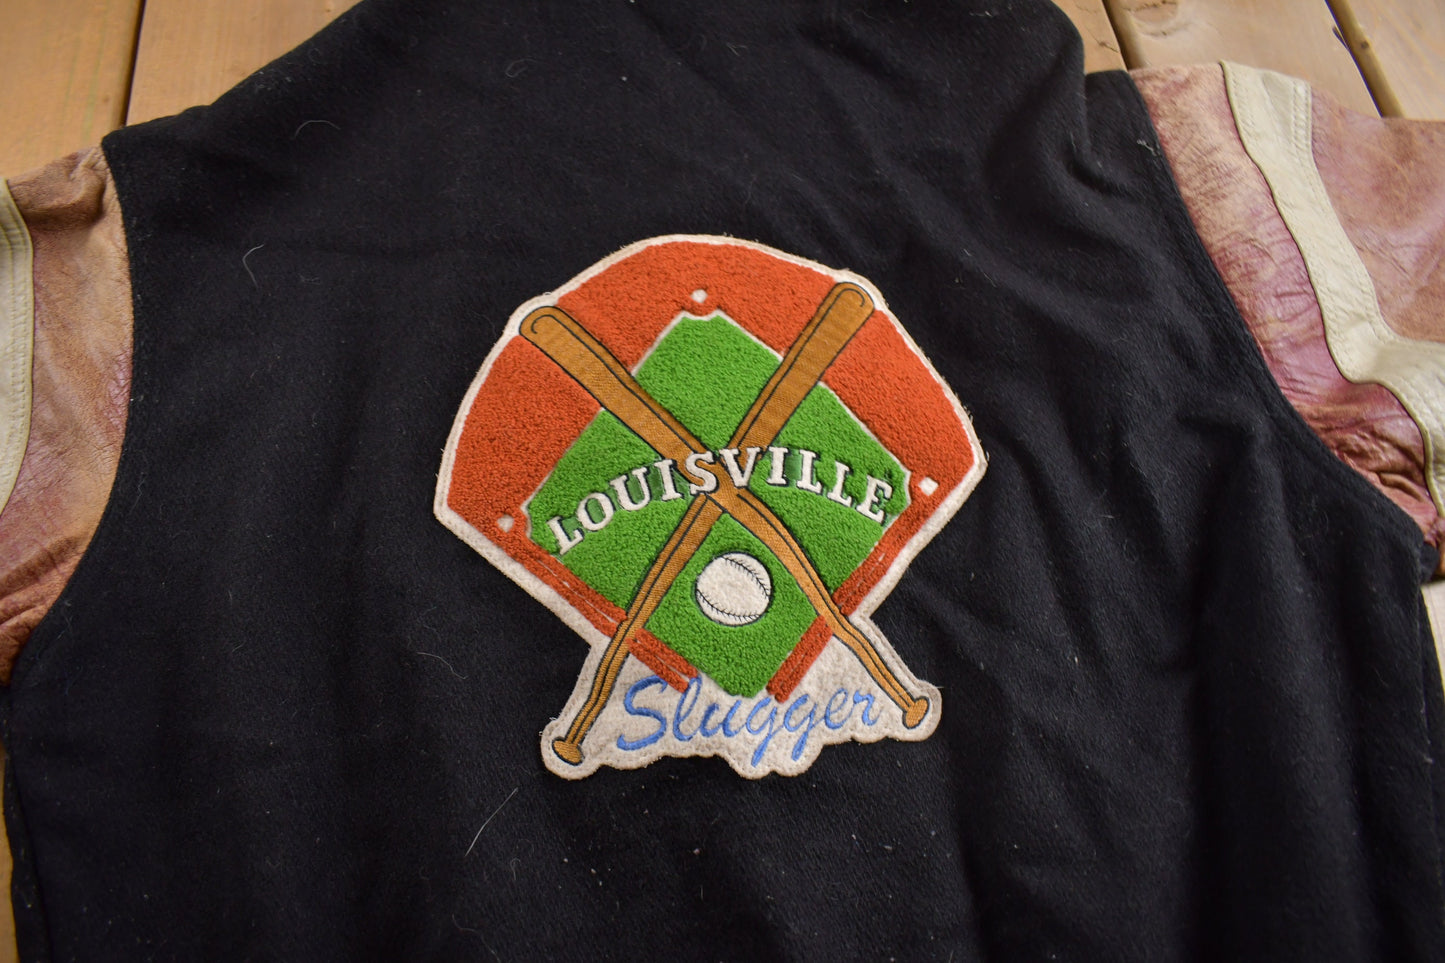 Vintage 1990s Louisville Slugger Baseball Leather Varsity Jacket /  Embroidered / Patchwork / Made In USA / Cooper Collections